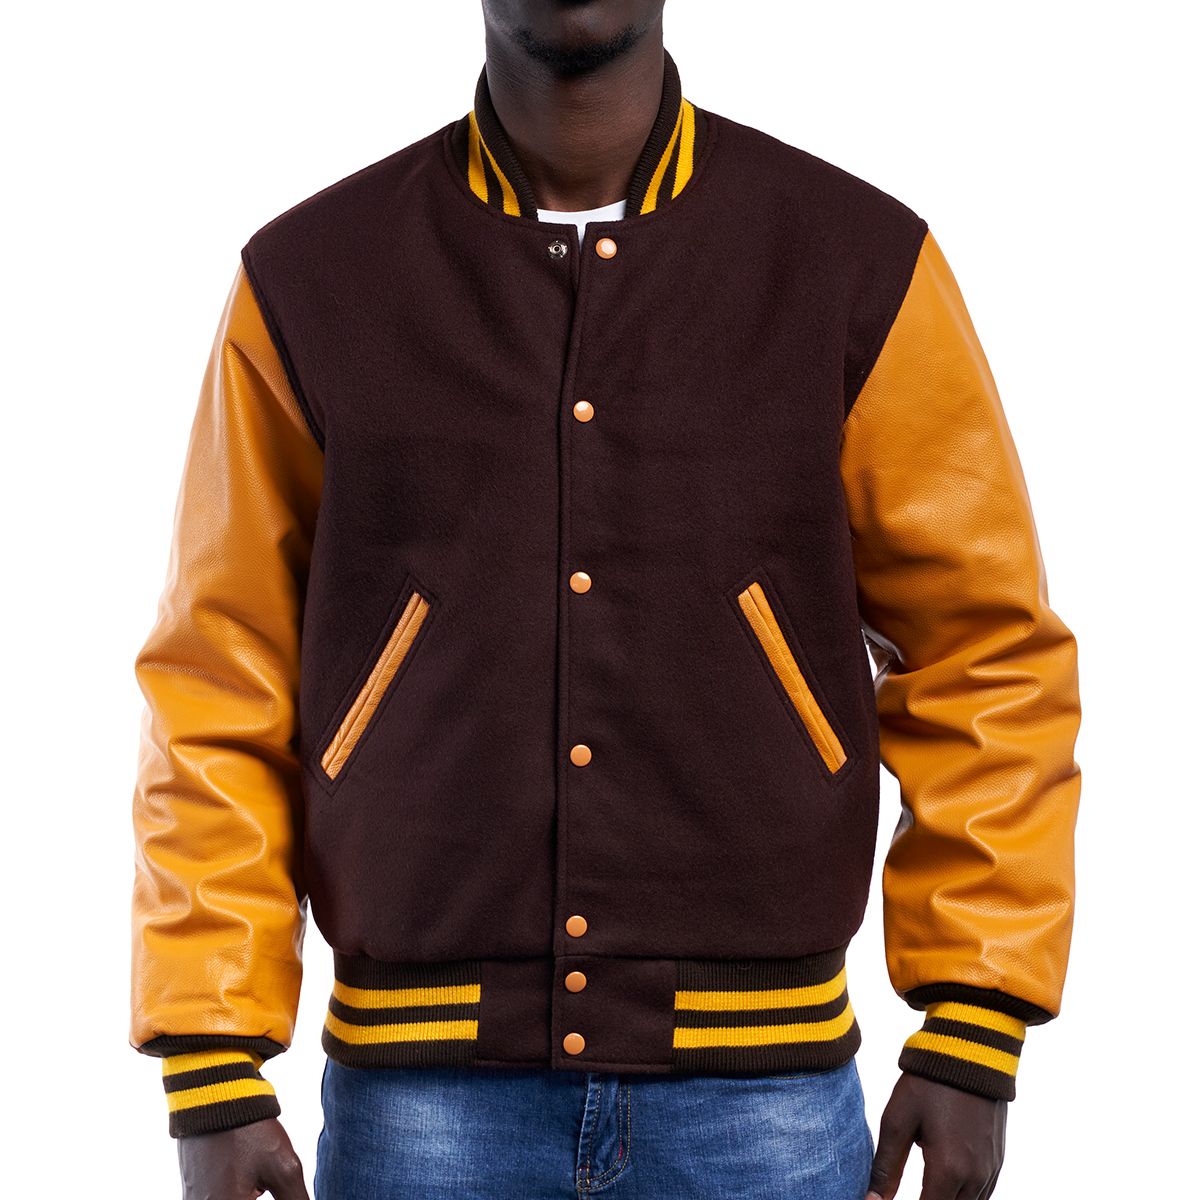 How to Choose the Perfect Varsity Letterman Jacket | by Leatheroutlet |  Medium